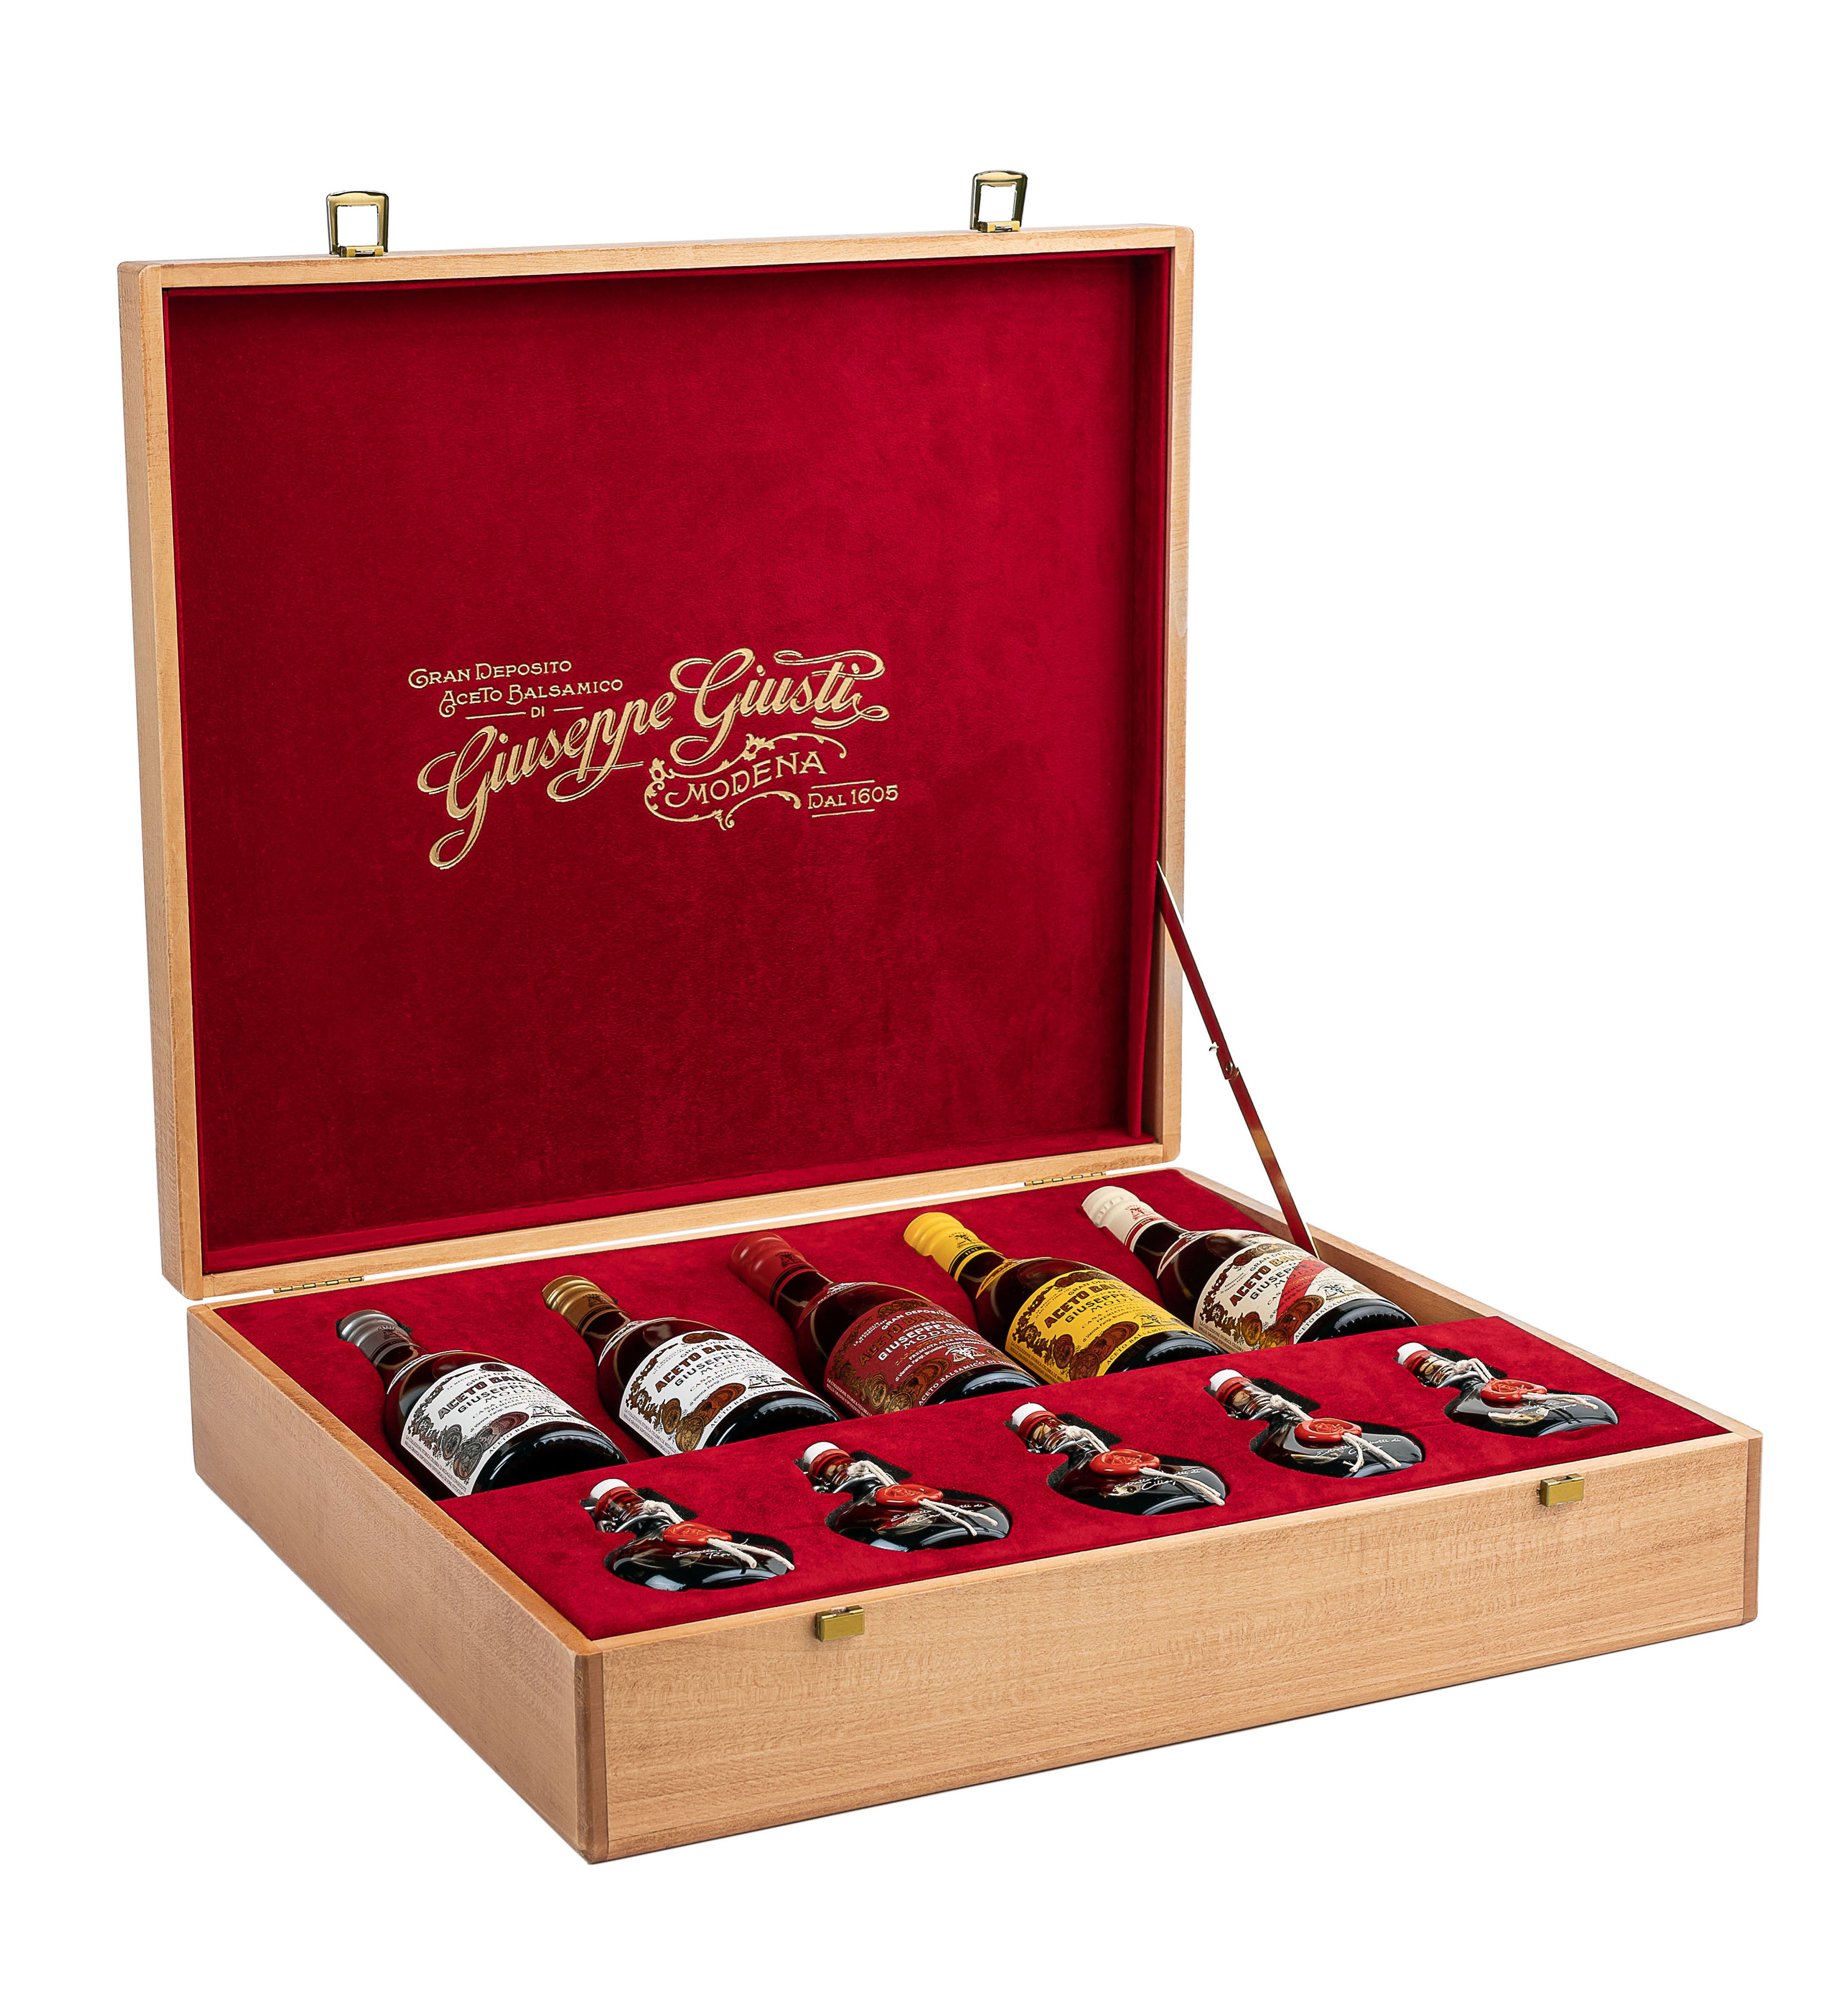 Scrigno Historical Balsamic Vinegar Collection with Wooden Box by Giusti